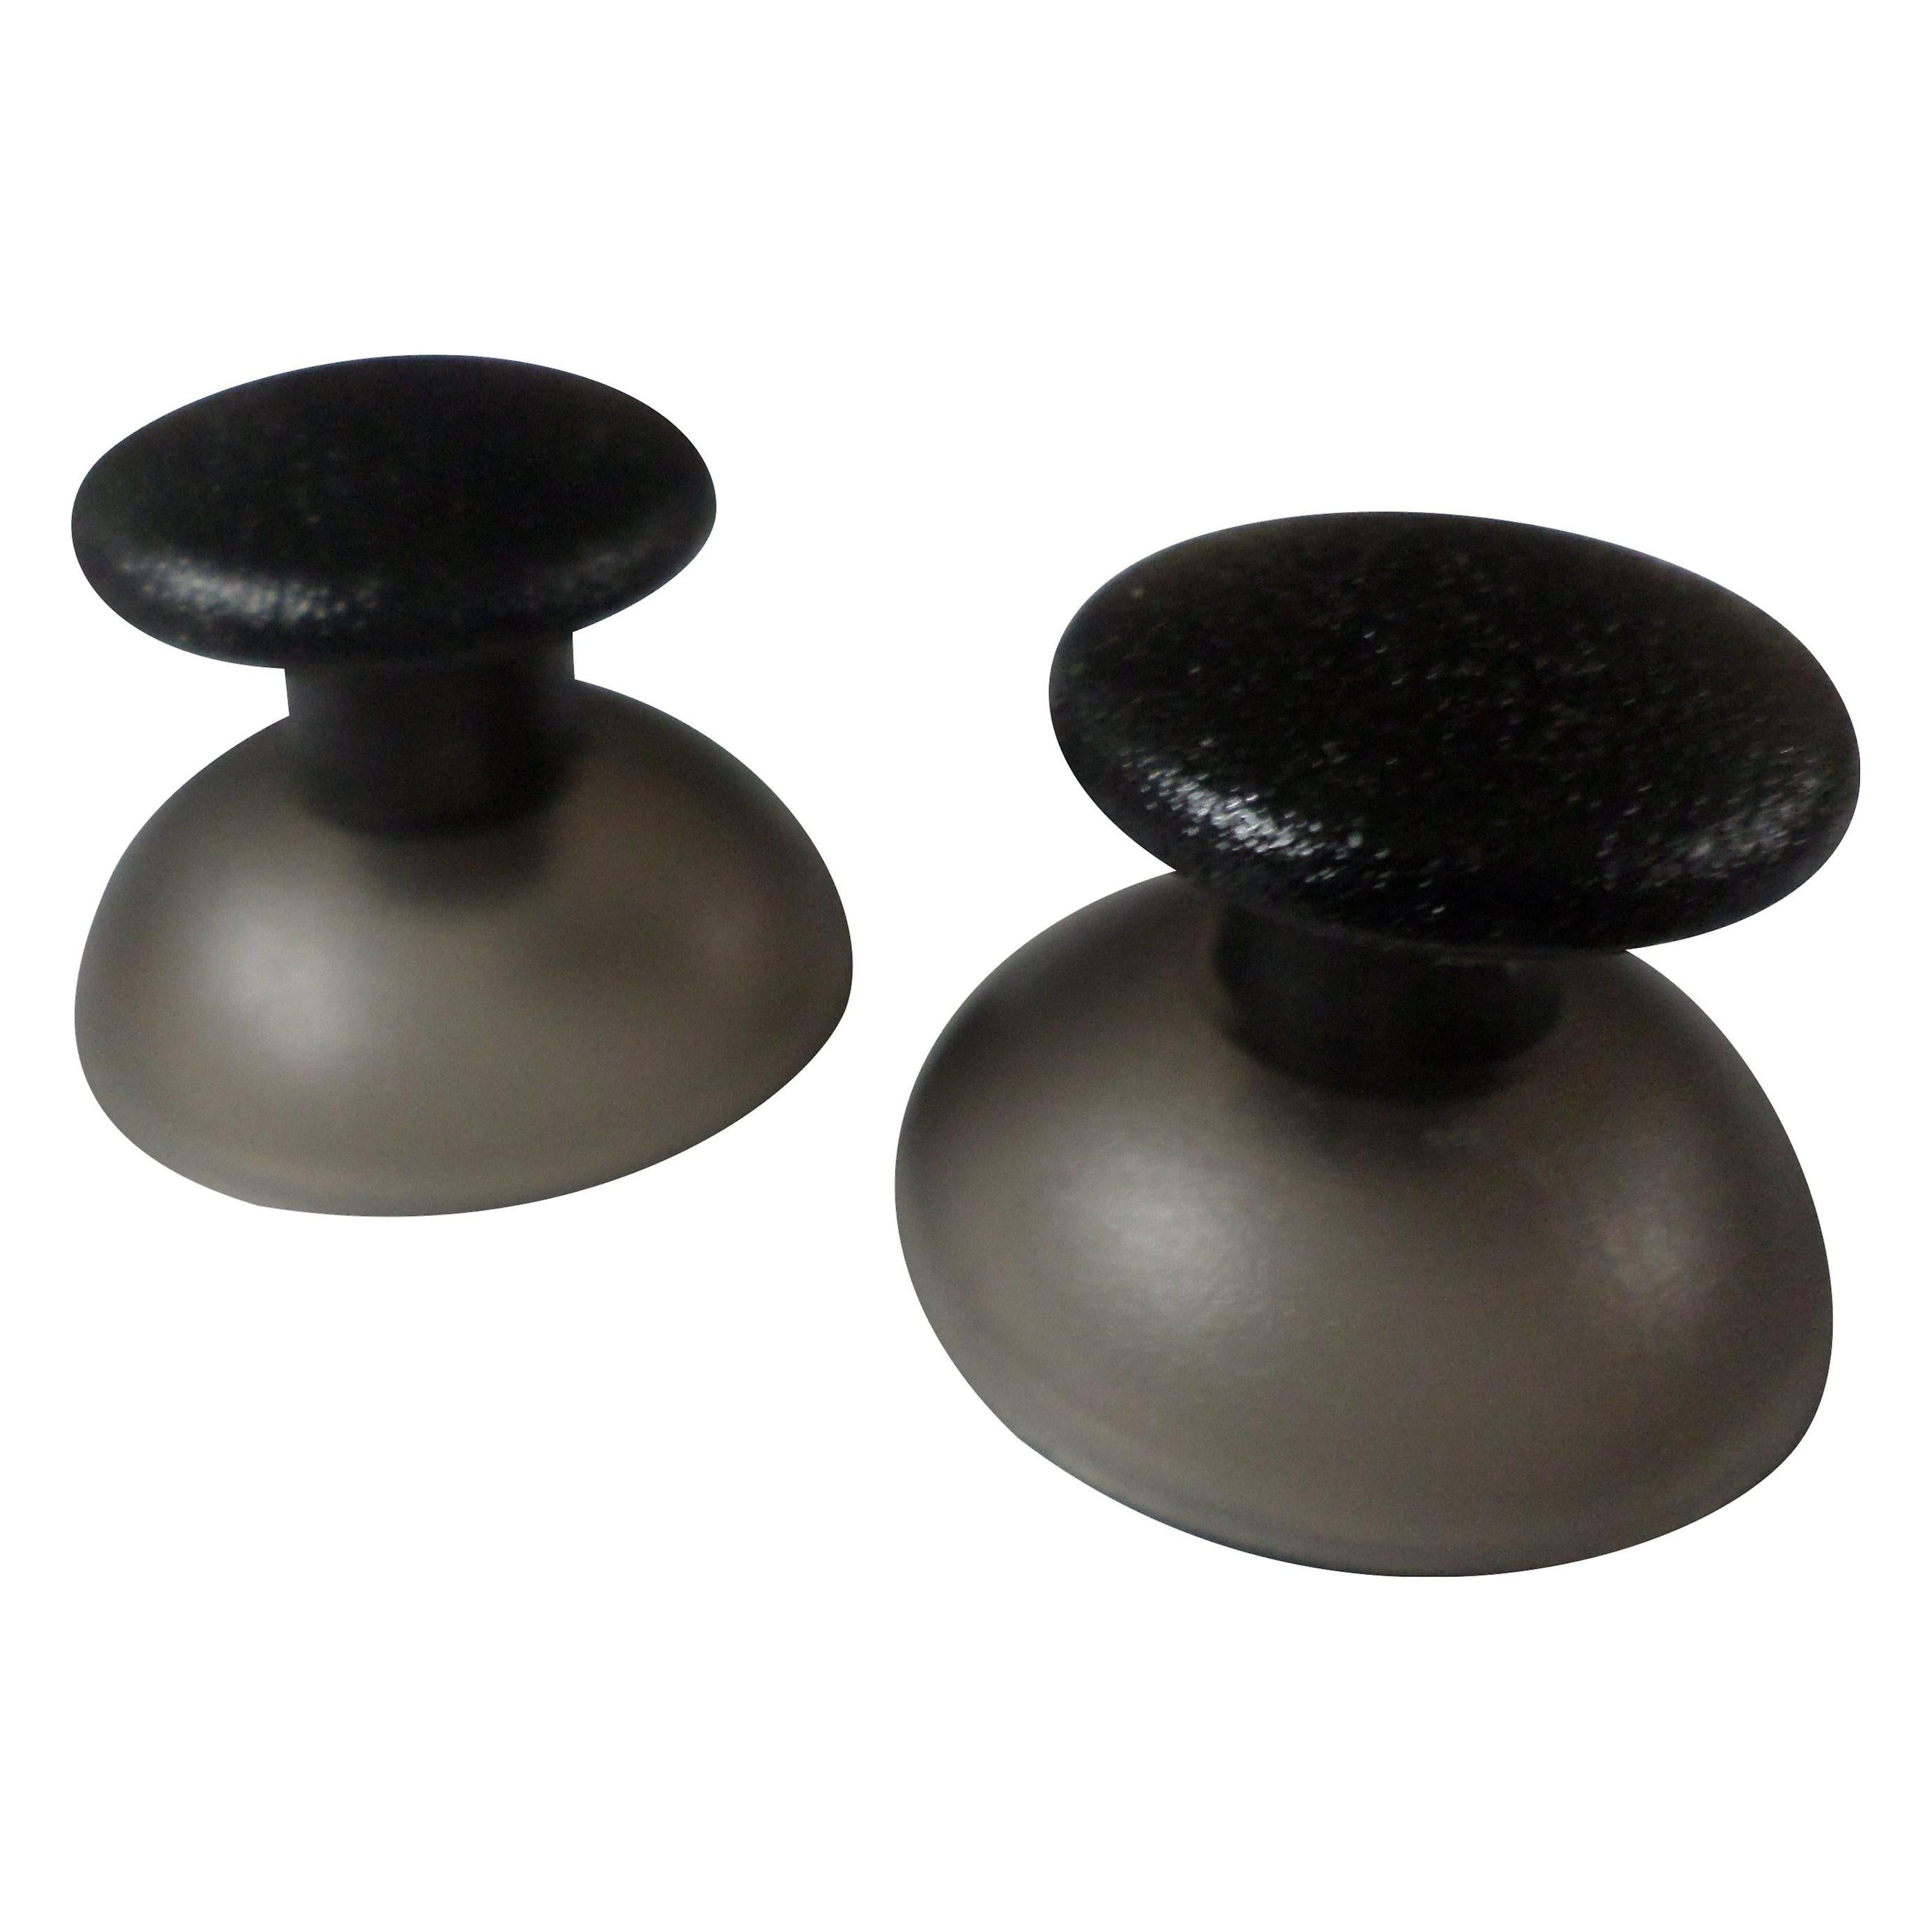 PS3 Controller Replacement Black Thumb Sticks (Two Pack)